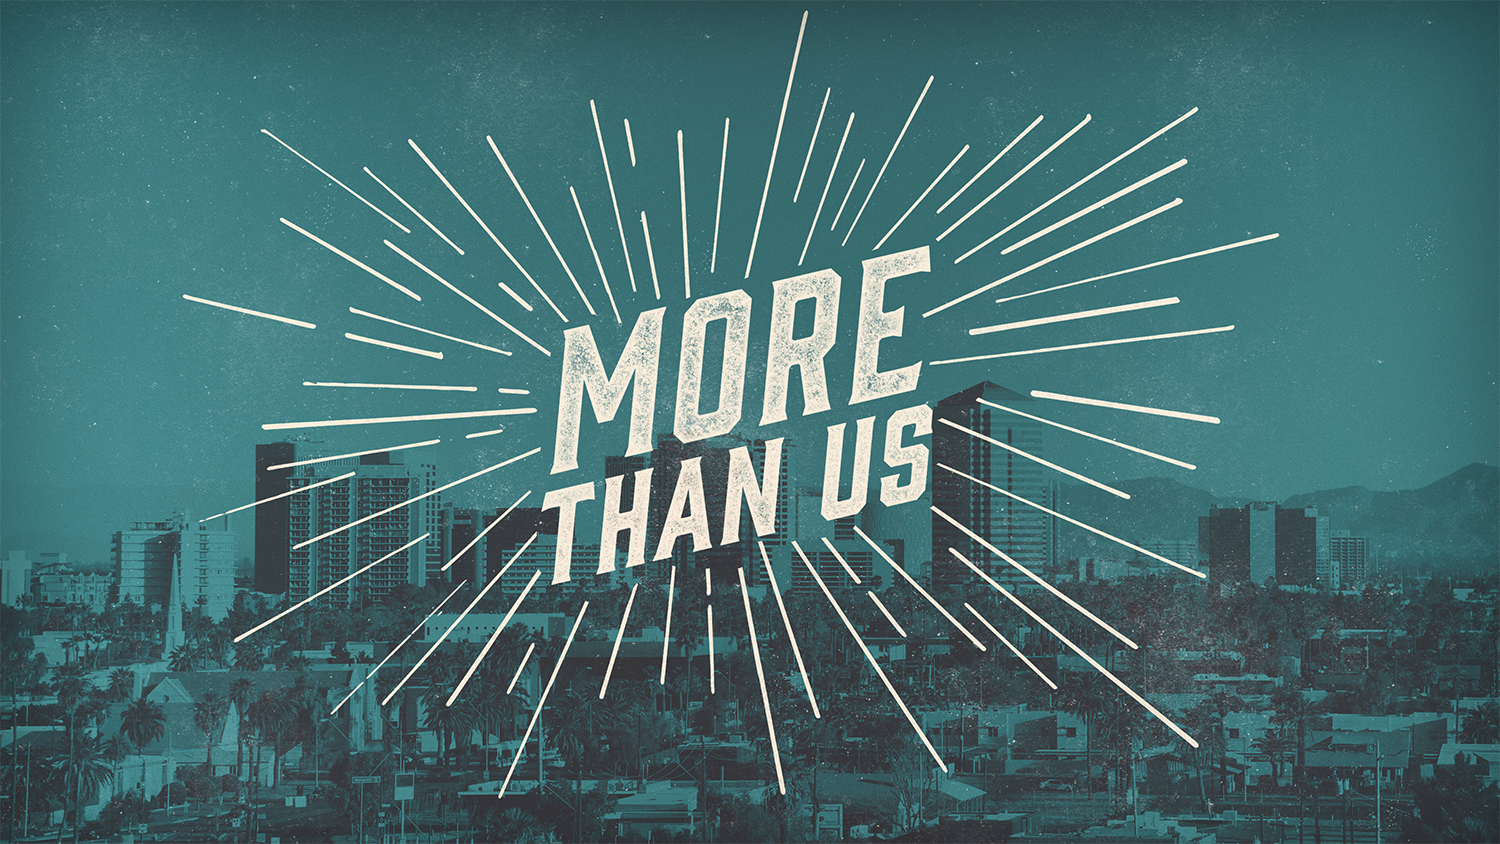 More Than Us